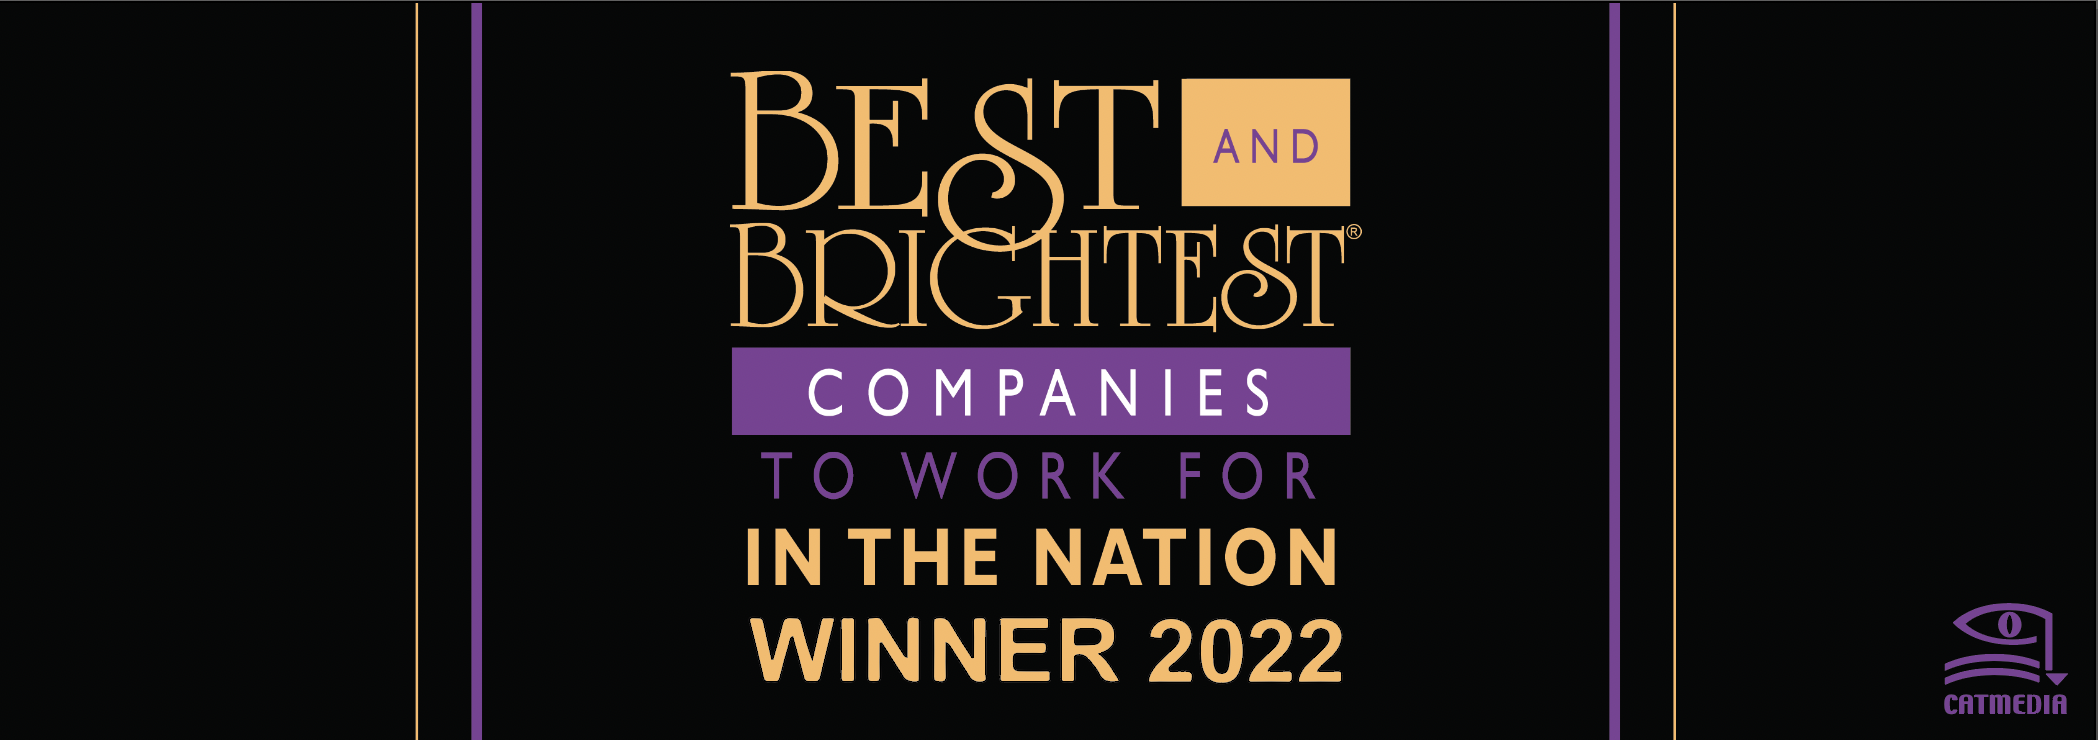 Best and Brightest Companies to Work for in the Nation Winner 2022